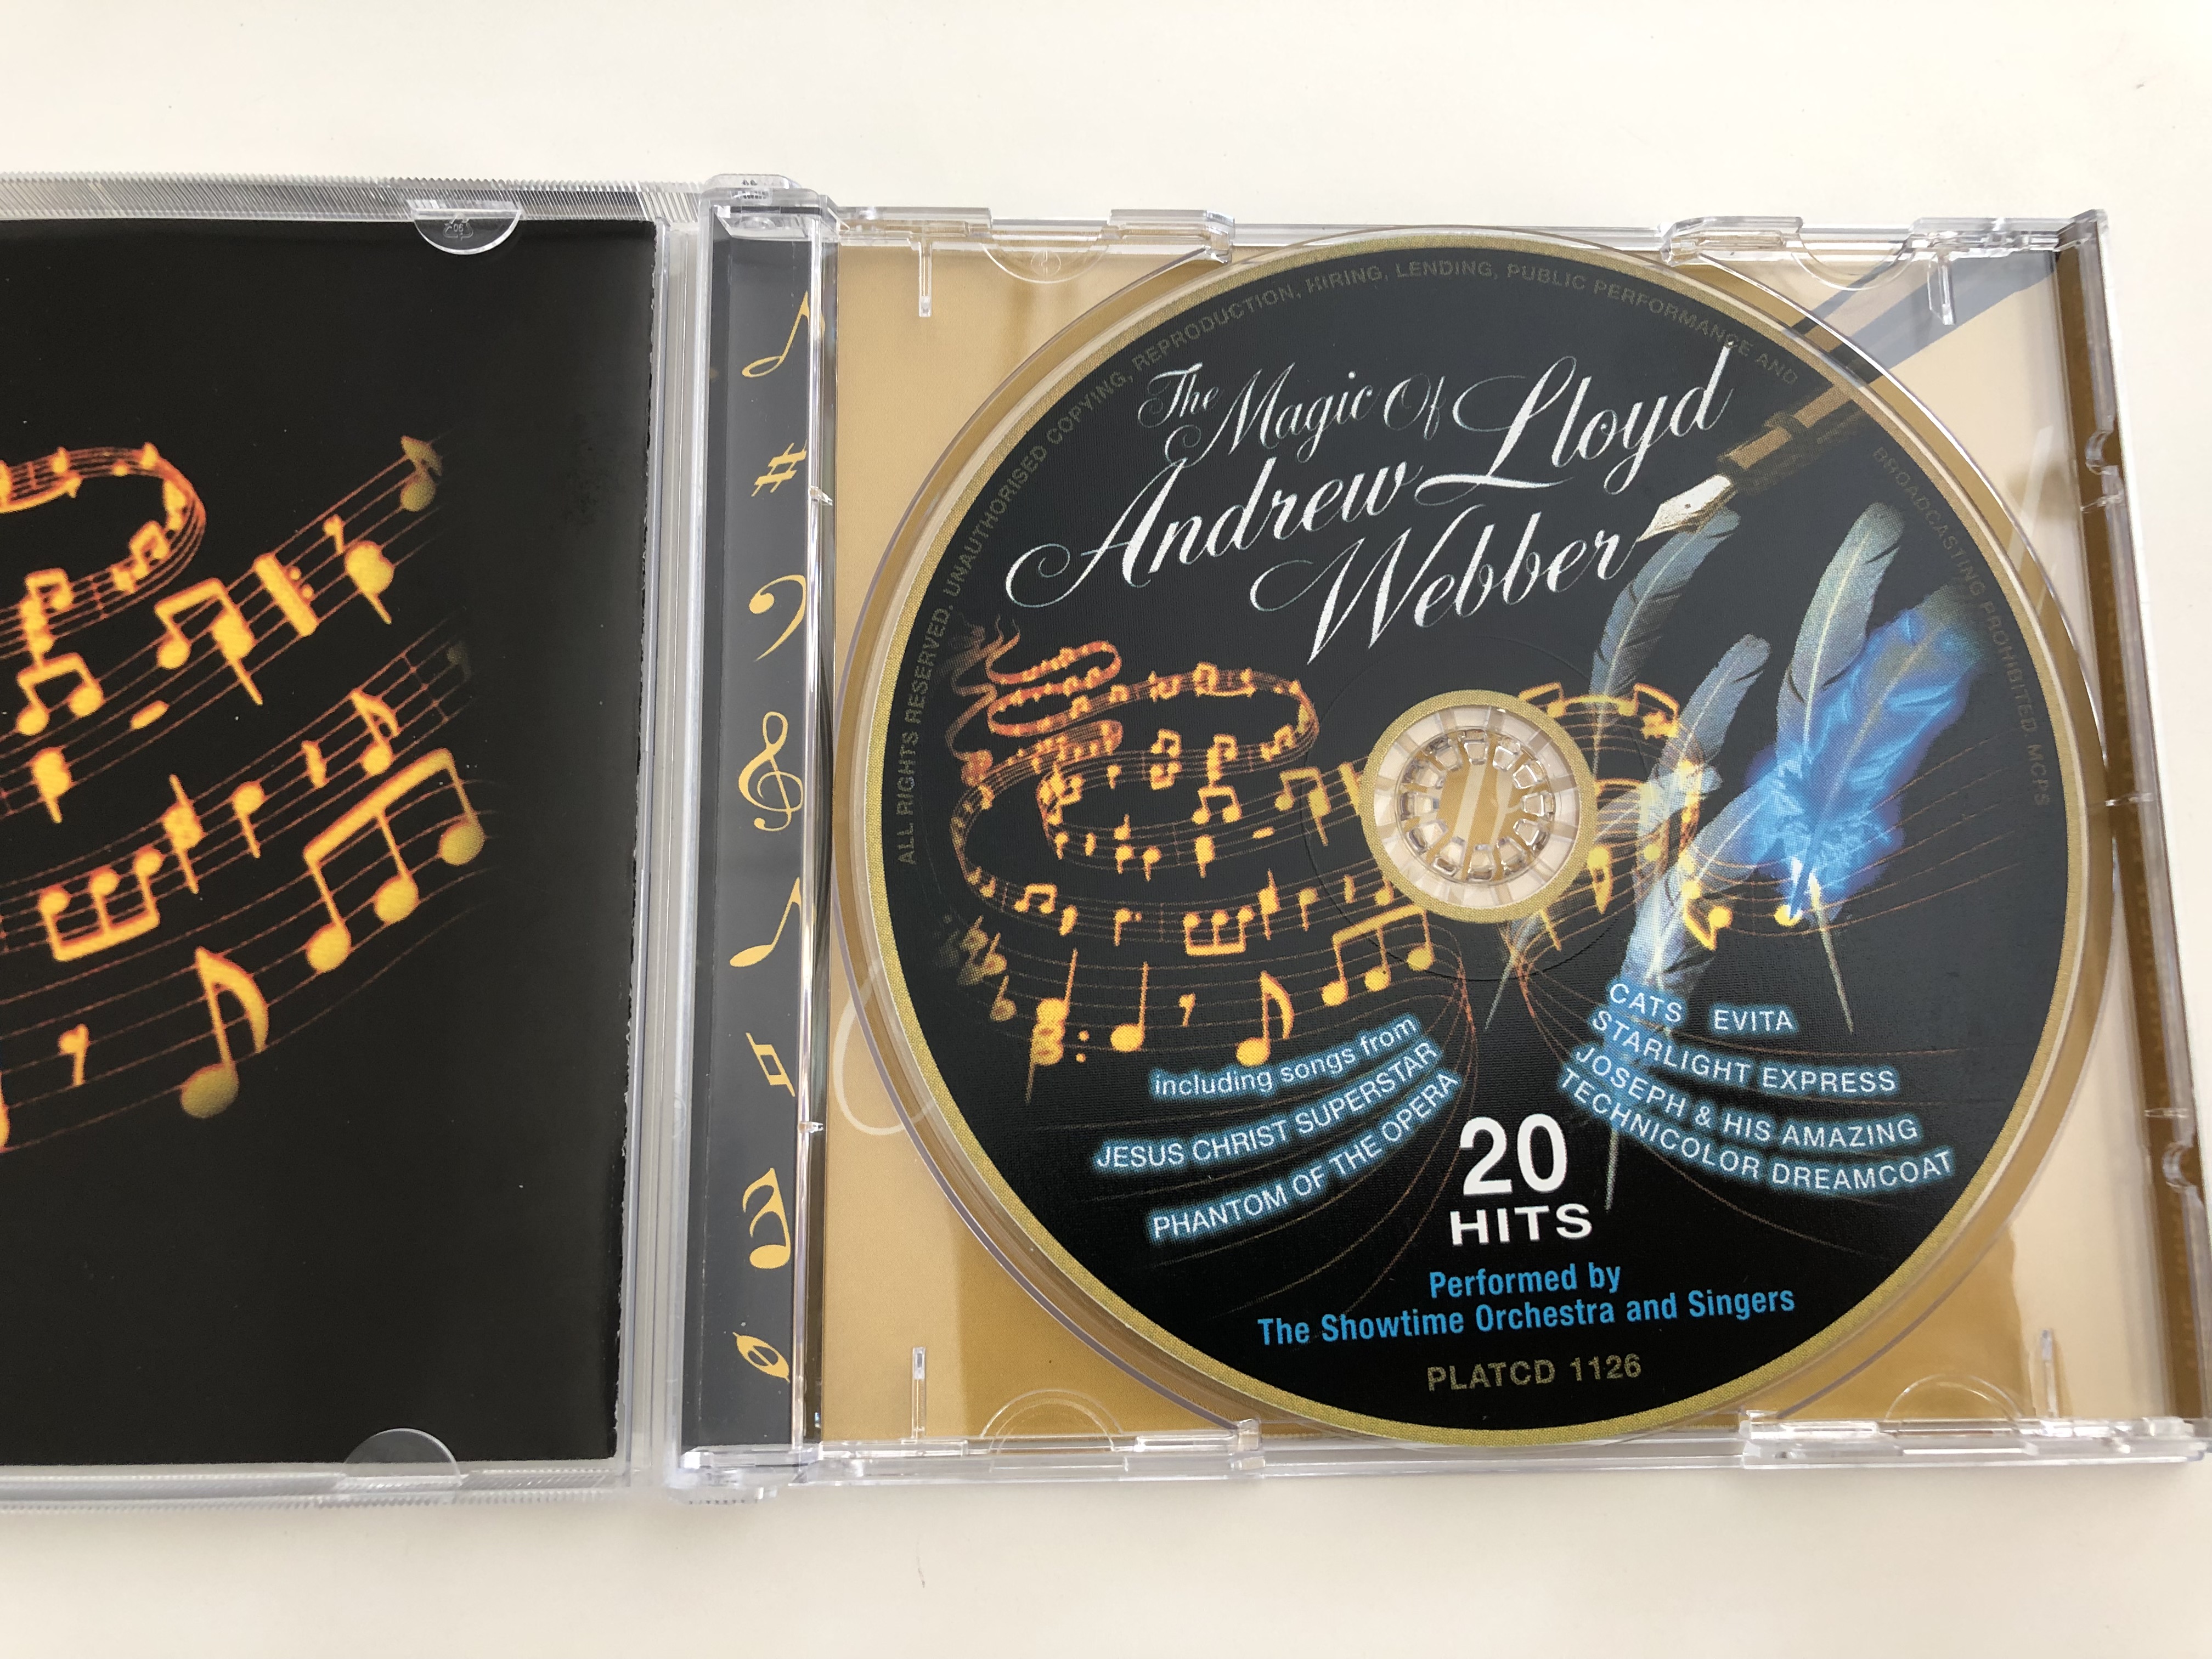 the-magic-of-andrew-lloyd-webber-20-hits-performed-by-the-showtime-orchestra-and-singers-including-songs-from-jesus-christ-superstar-phantom-of-the-opera-cats-evita-audio-cd-platcd-1126-3-.jpg